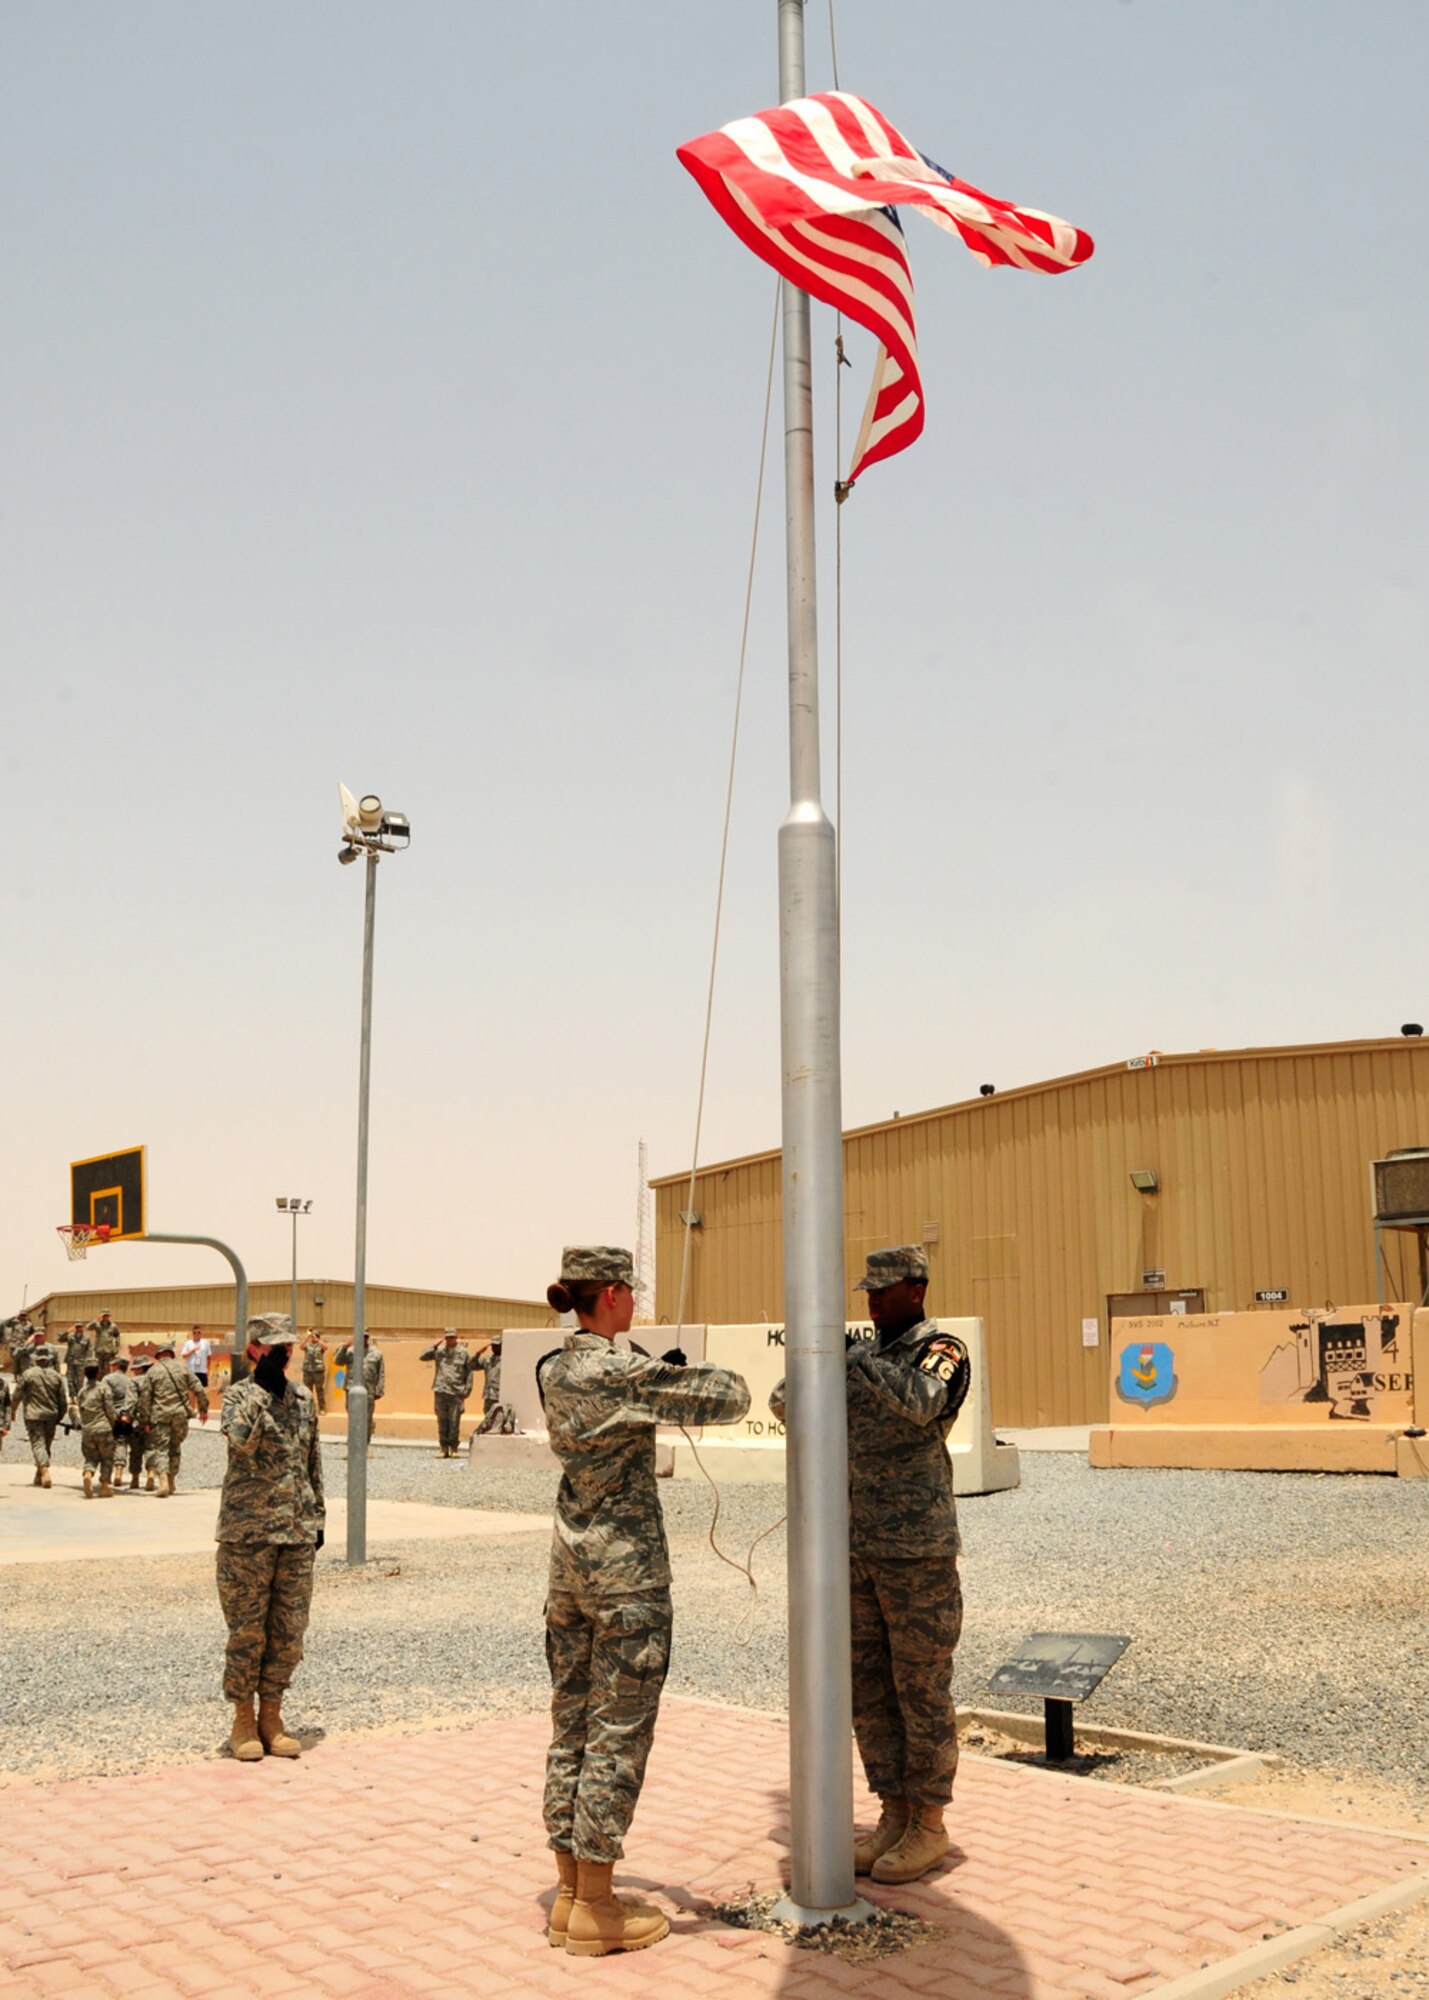 SOUTHWEST ASIA -- Honor Guard members Senior Airman Amanda Rosner, 386th Expeditionary Maintenance Squadron, and Airman 1st Class Ronell Wilder, 386 Expeditionary Logistics Readiness Squadron, raise the American flag during the Memorial Ceremony as Master Sgt. Betsi Keltz, 43rd Expeditionary Electronic Combat Squadron, salutes in respect and honor for those who have died in our nation's service at an air base in Southwest Asia, May 25. Memorial Day was officially proclaimed May 5, 1868, by General John Logan, national commander of the Grand Army of the Republic and was first observed May 30, 1868. Airman Rosner is deployed from Yokota Air Base, Japan, and is originally from Alvin, Wis. Airman Wilder is deployed from Hurlbert Field Air Force Base, Fla., and is originally from Belzoni, Miss. Sergeant Keltz is deployed from Davis-Monthan Air Force Base, Ariz., and is originally from Kingston, N.Y. (U.S. Air Force photo/ Senior Airman Courtney Richardson)